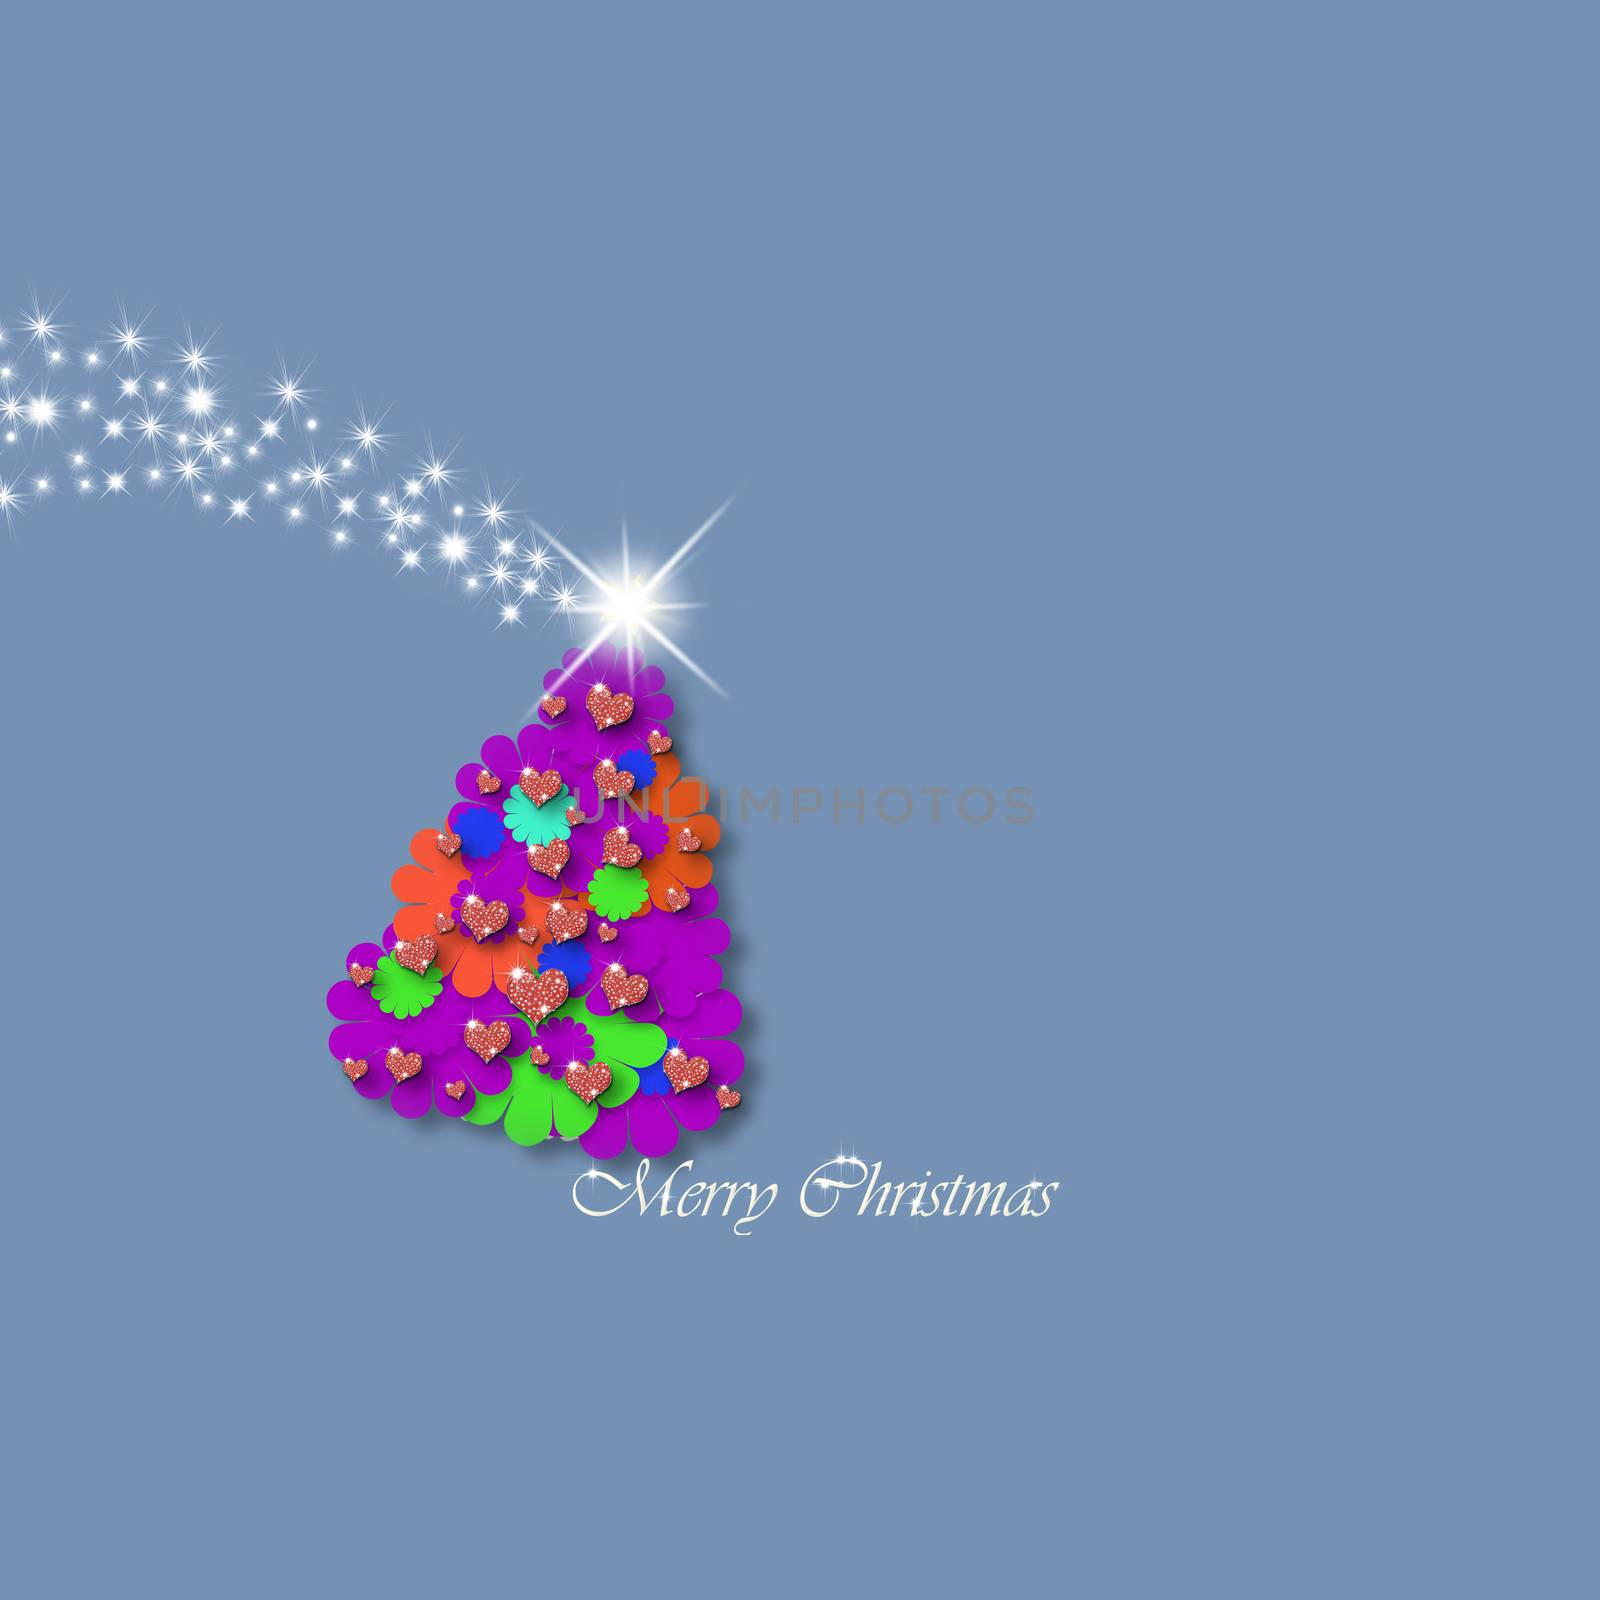 Merry Christmas greeting card by Carche